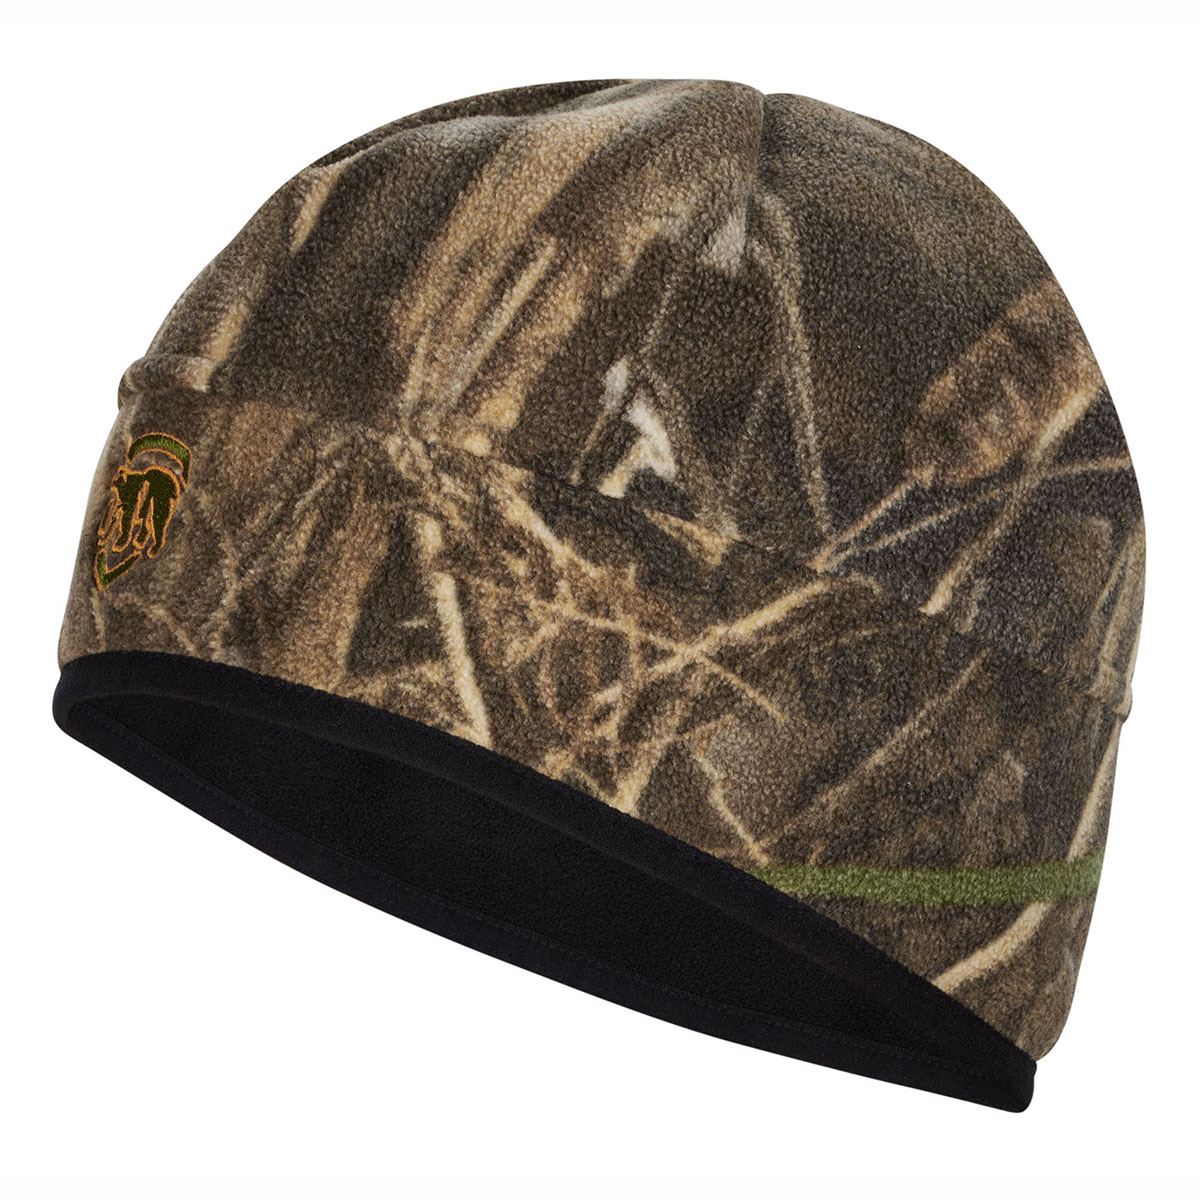 SHERPA FLEECE BEANIE - Outerwear Collections REALTREE MAX-7® Hunting ArcticShield and Systems 